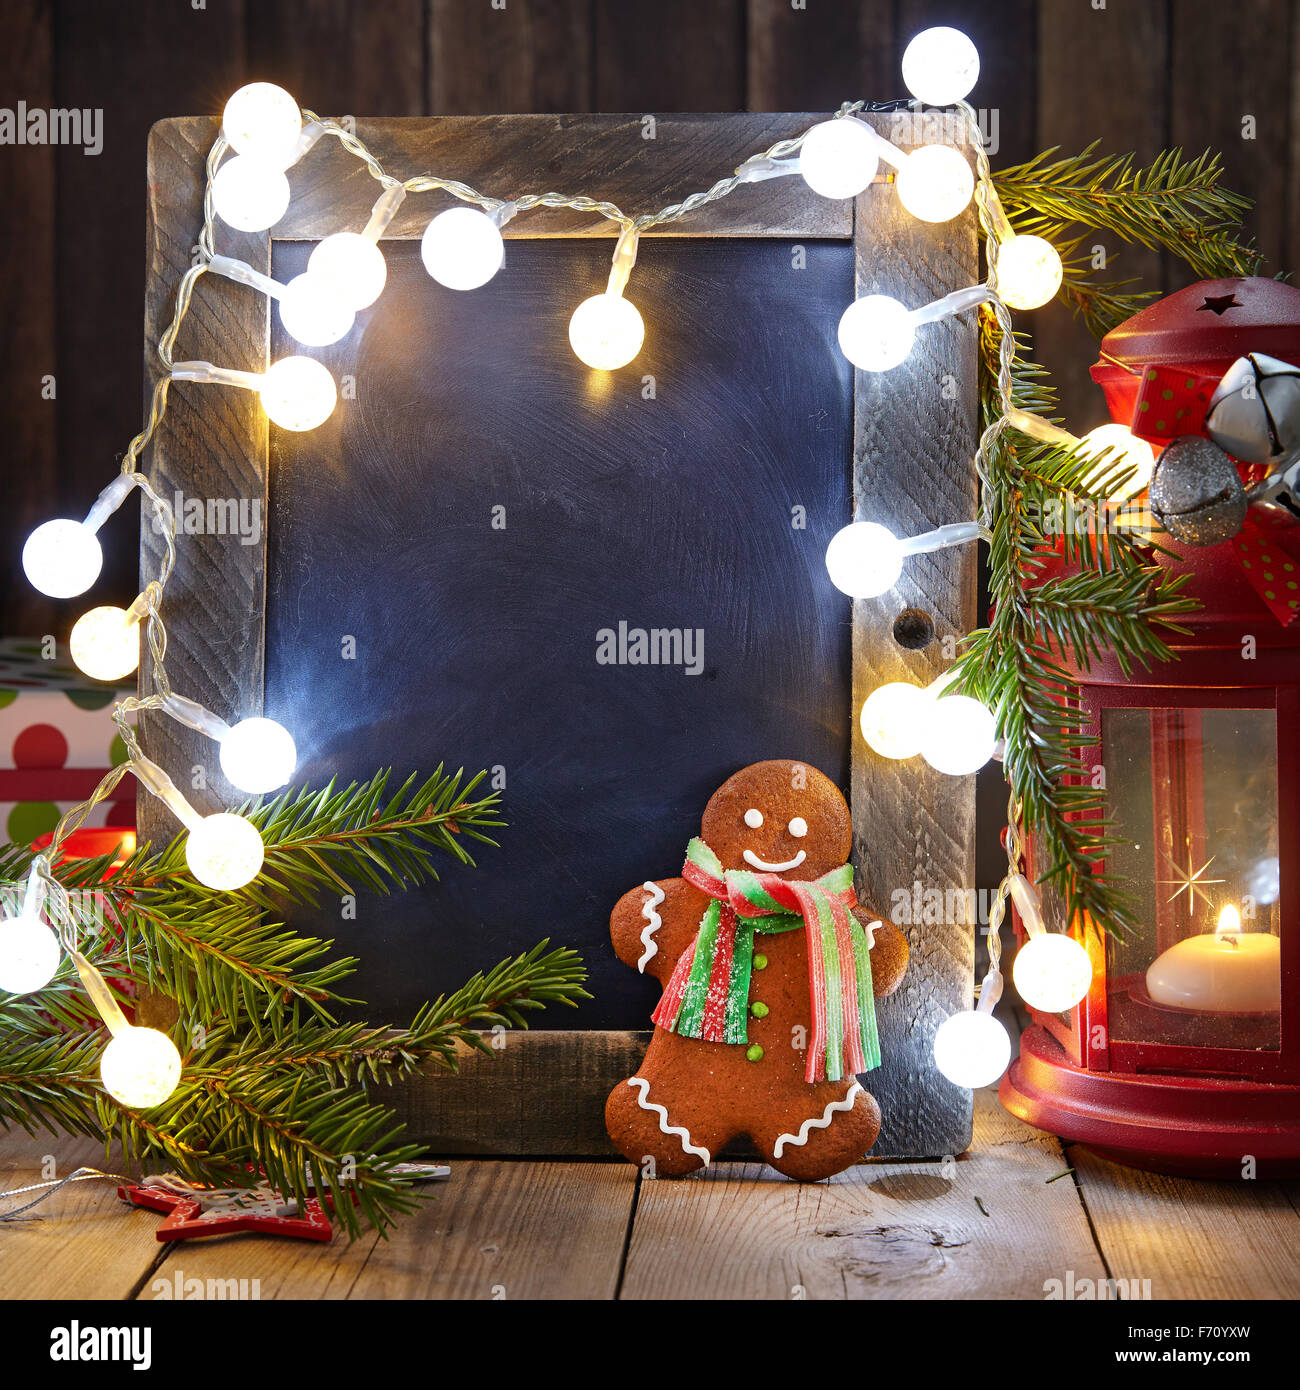 Christmas decoration with chalkboard and gingerbread man Stock Photo